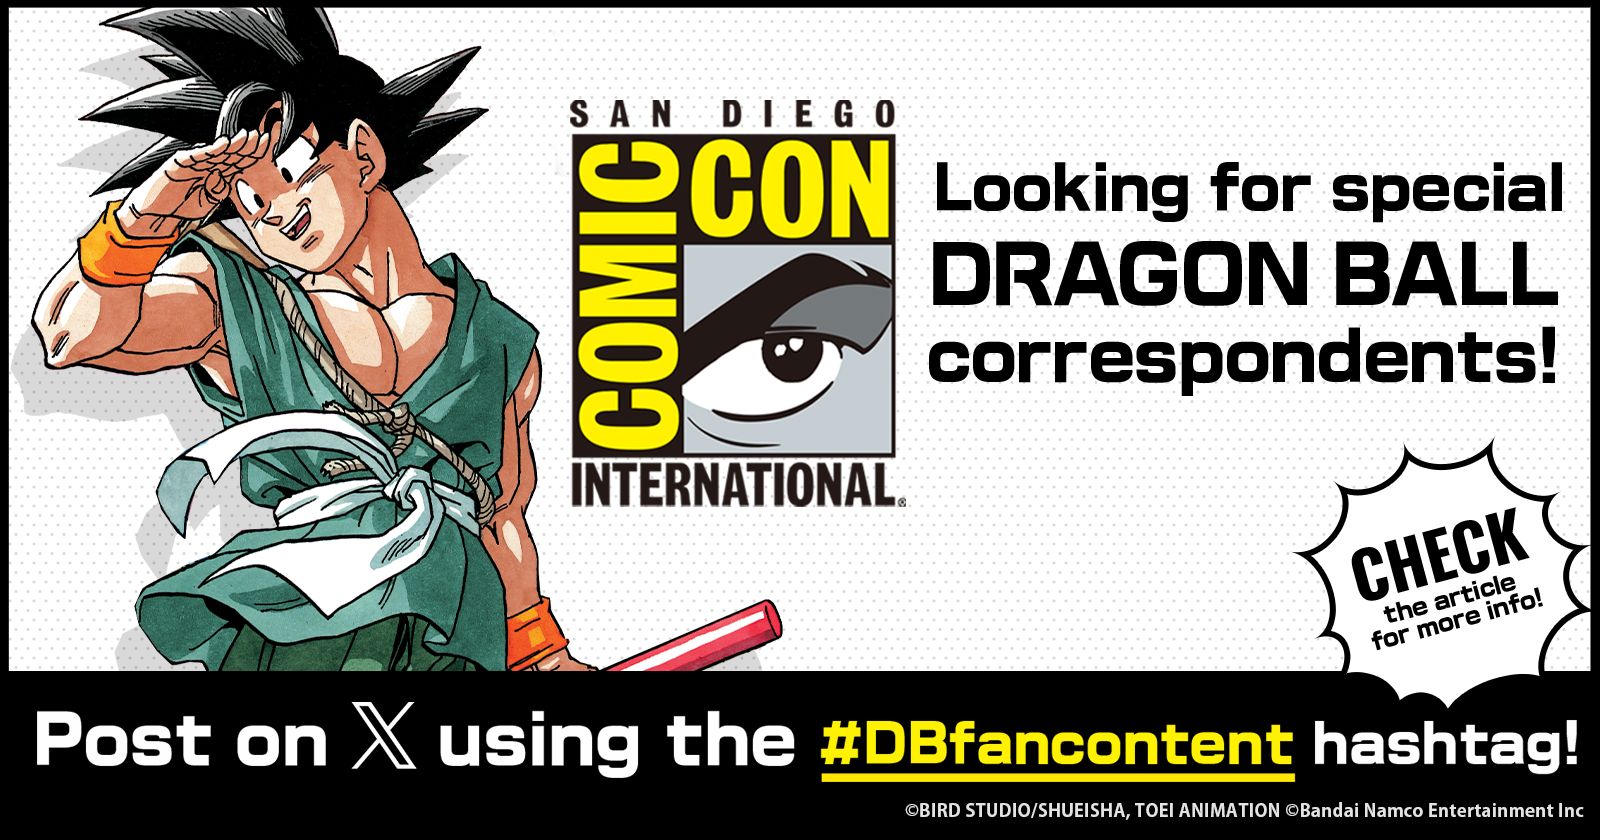 Looking for Special Correspondents for Comic-Con International: San Diego! Just Post on X Using the Hashtag #DBfancontent to Participate!